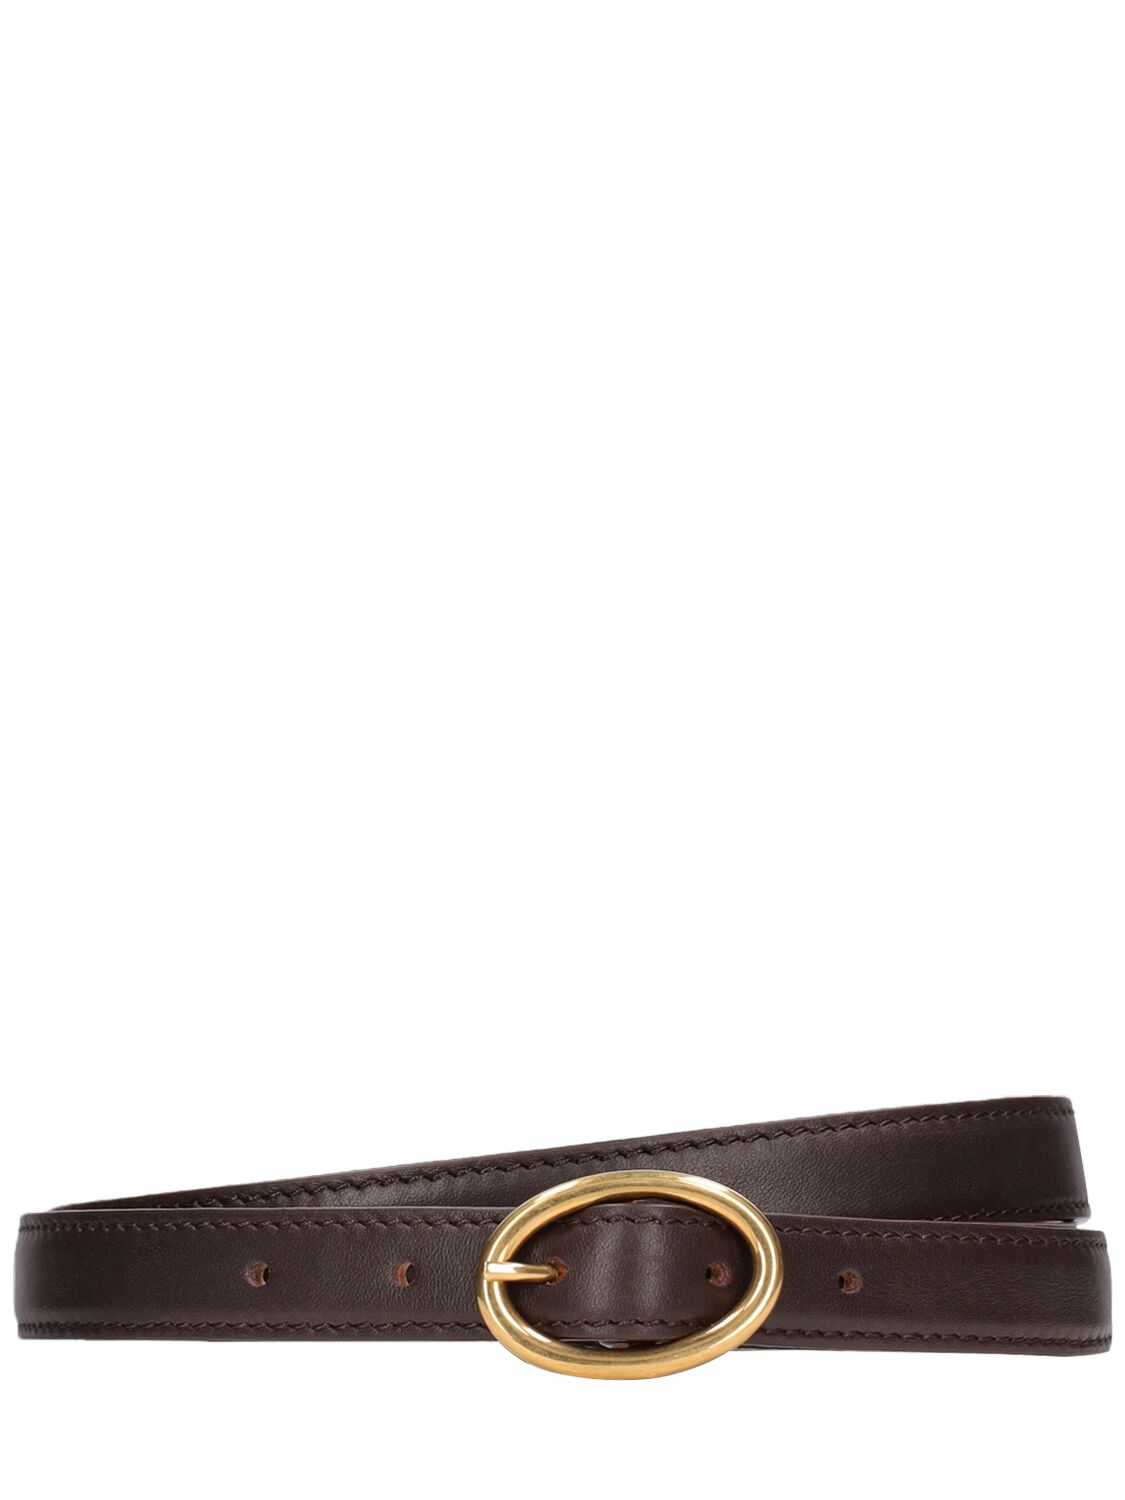 Annagreta Sable X  2cm Calf Leather Belt In Tabacco Brown